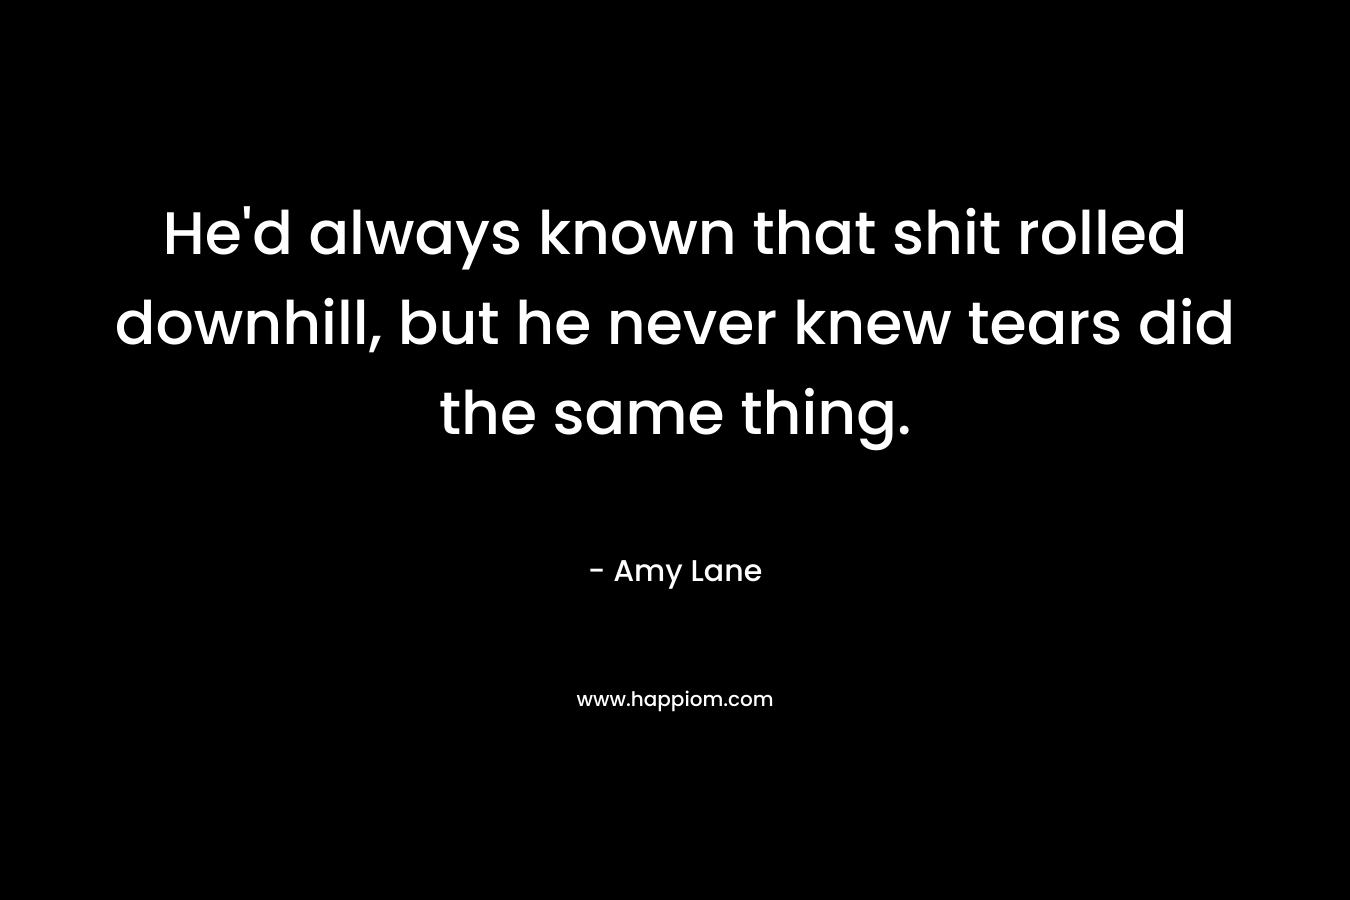 He’d always known that shit rolled downhill, but he never knew tears did the same thing. – Amy Lane